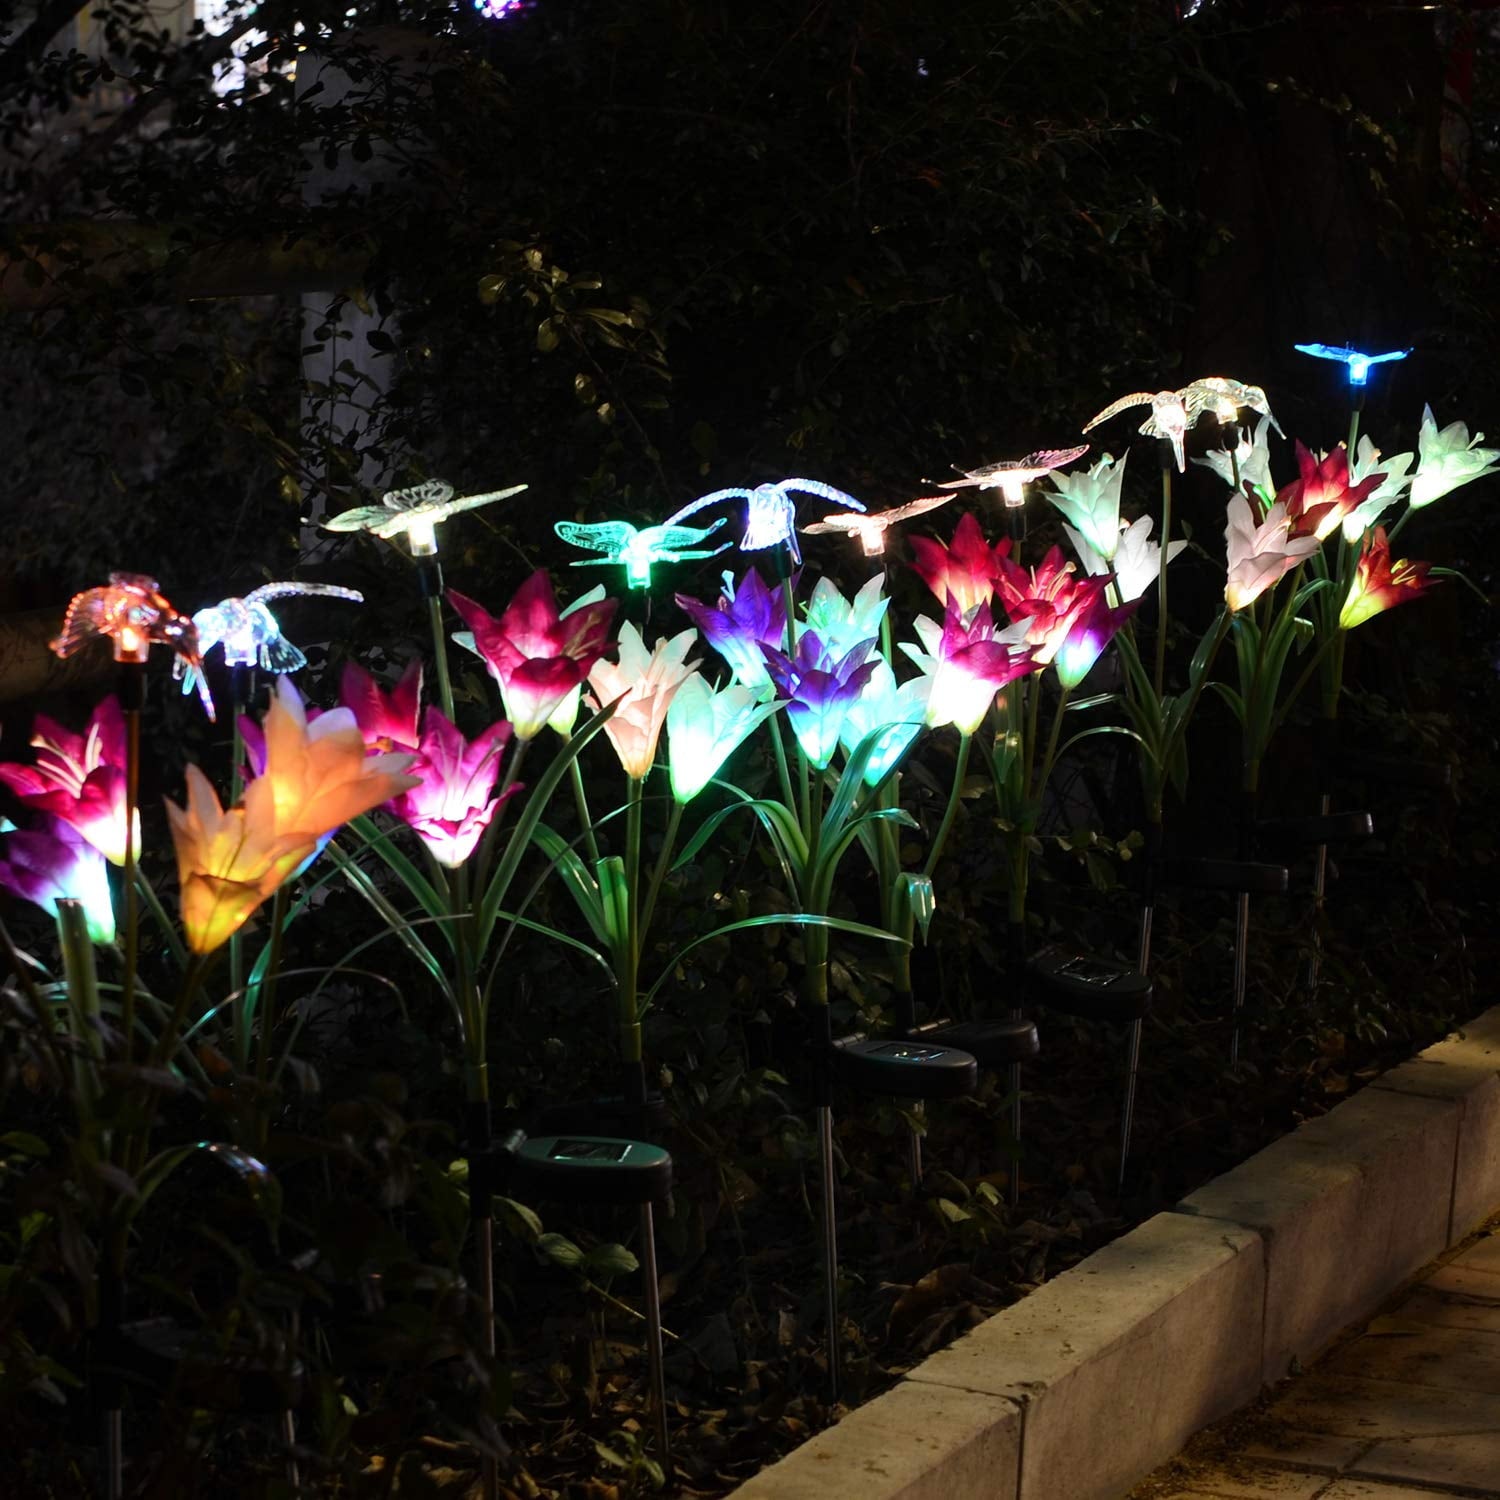 Enchanted Garden Solar Lily Lights - 2 Pack Multi-Color LED Flowers